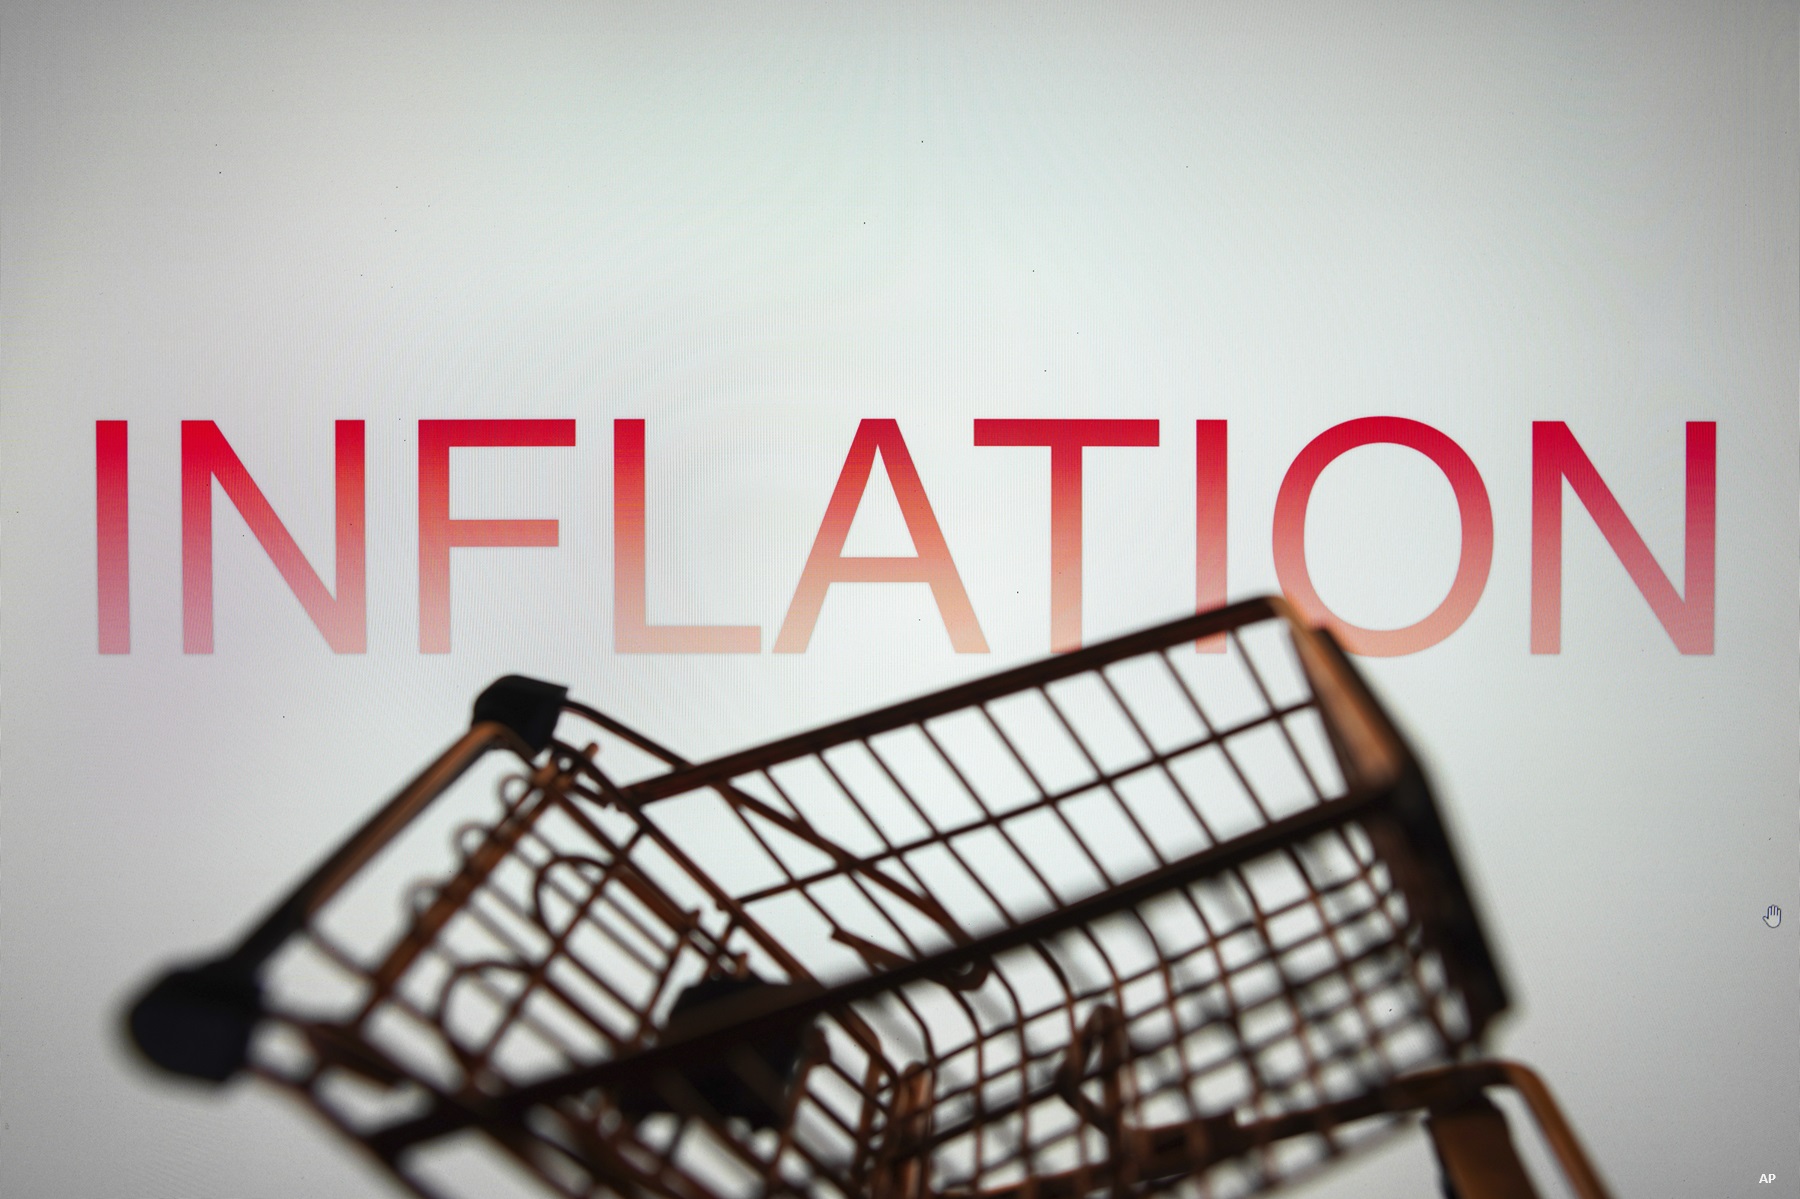 In this photo illustration, the Inflation text seen displayed on a smartphone along with a shopping cart.